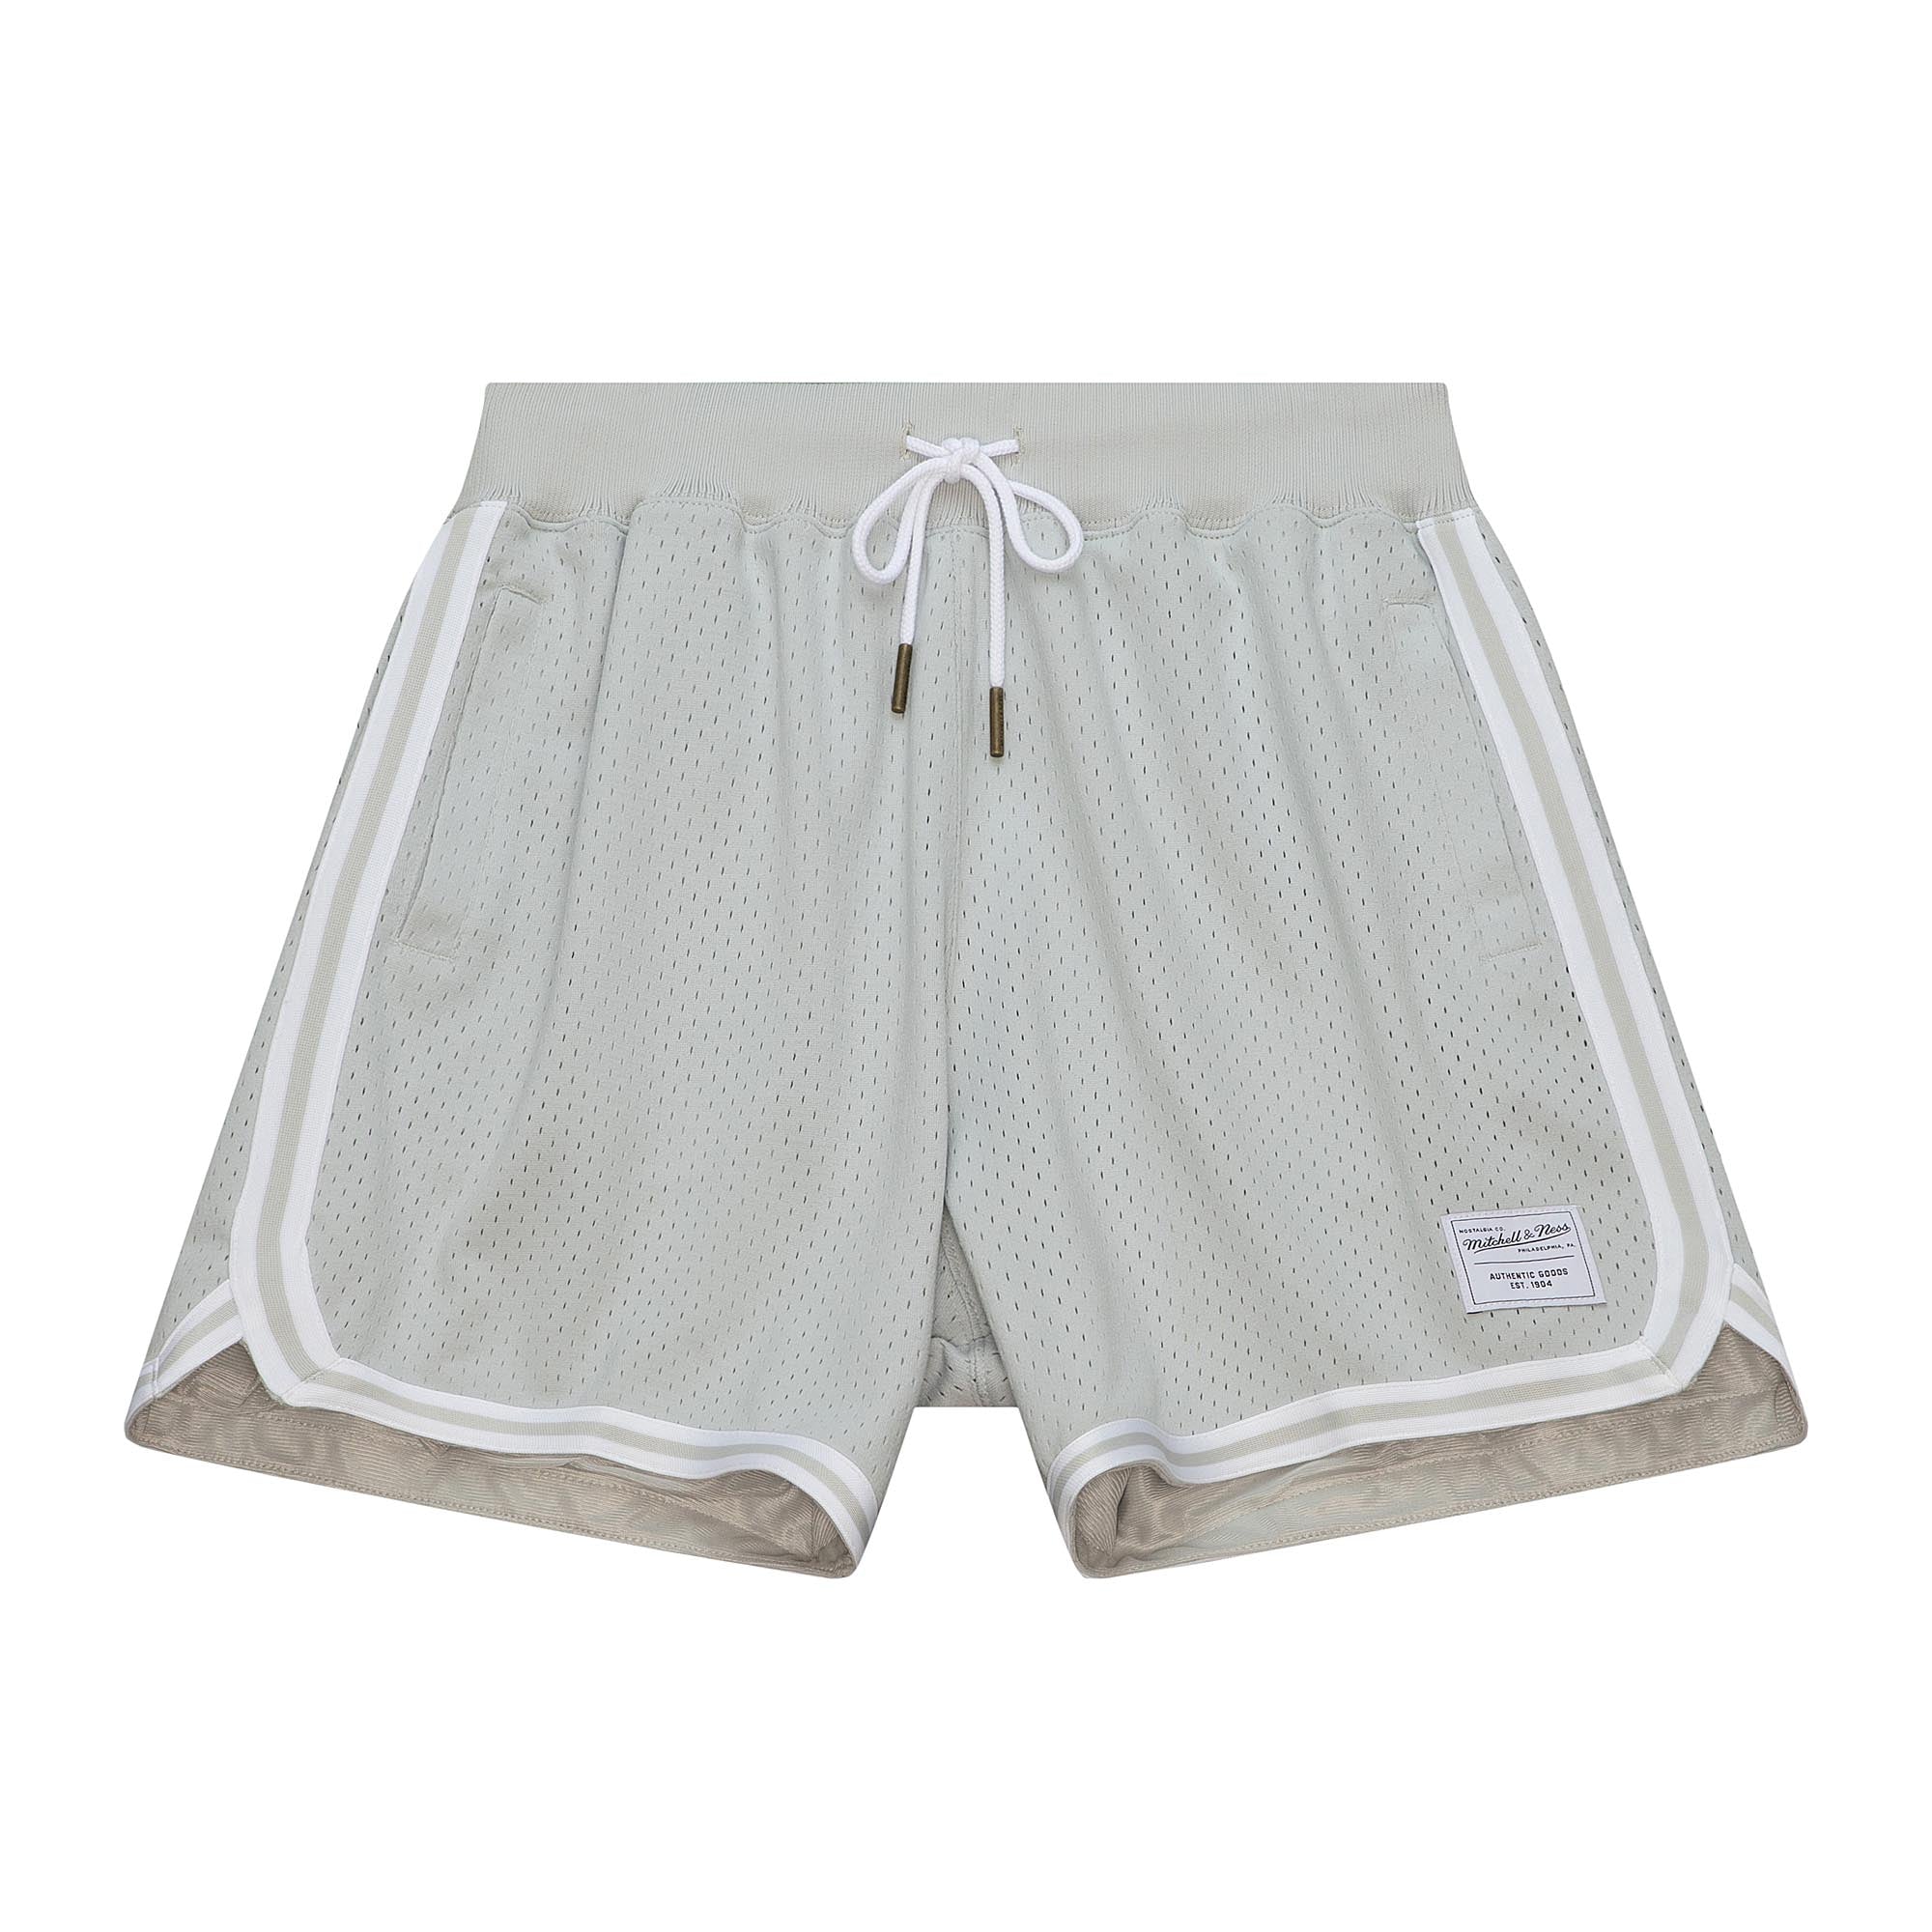 Game Day 2.0 Shorts - Own Brand Light Grey